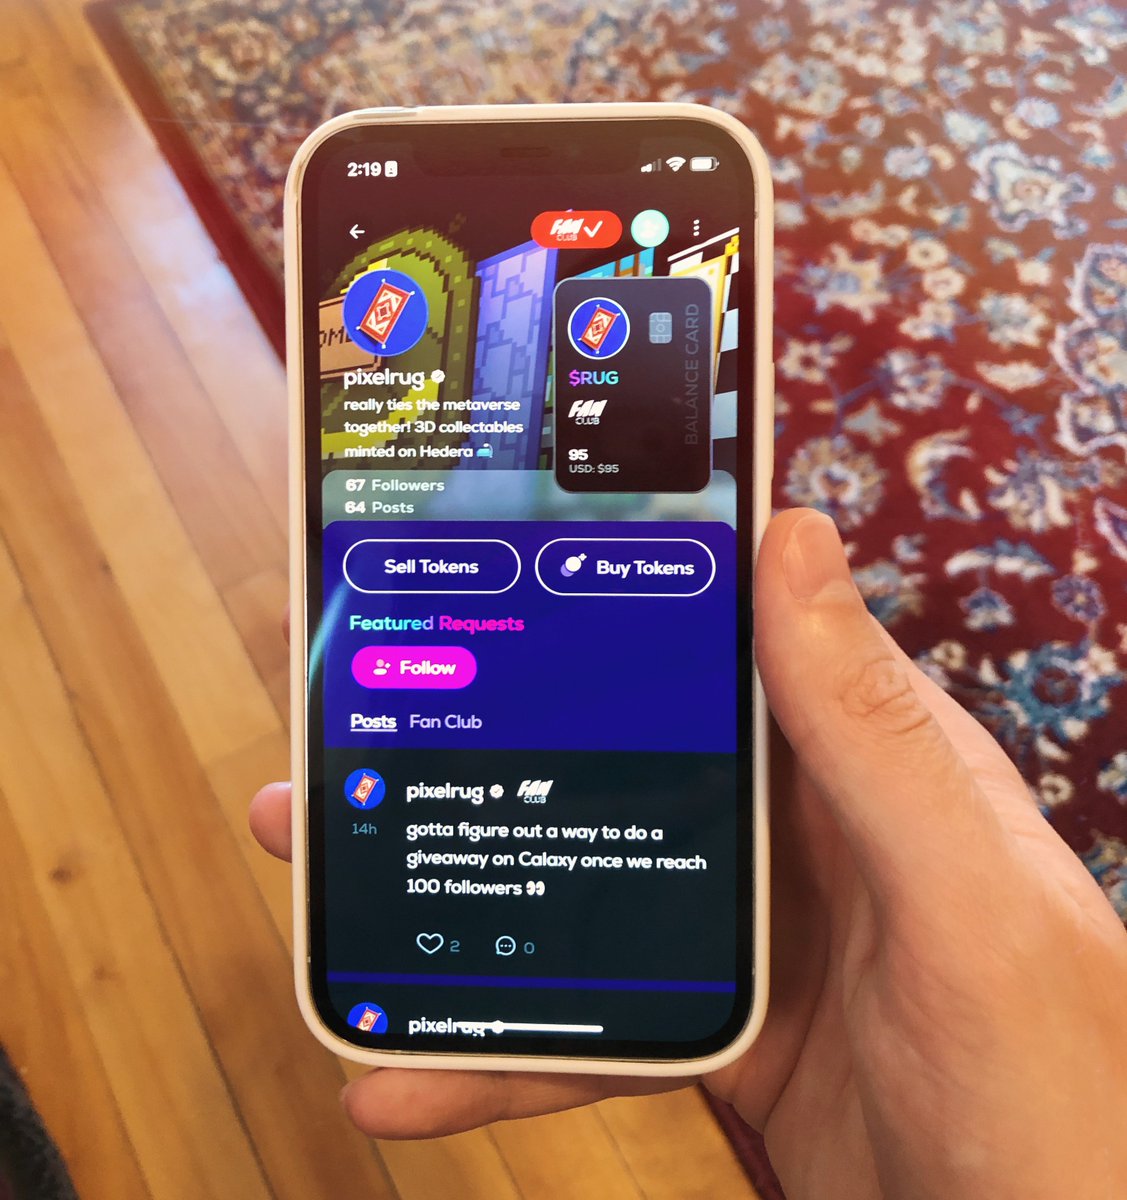 Calaxy Beta Code Giveaway 🪐 we've obtained an extra beta code for @CalaxyApp and it's going to a PixelRug holder in our Discord! Calaxy is a social media platform built on @hedera (it’s really cool) deets on how to enter below 👇 ends in 72hrs #HederaNFT #HederaHeatWave